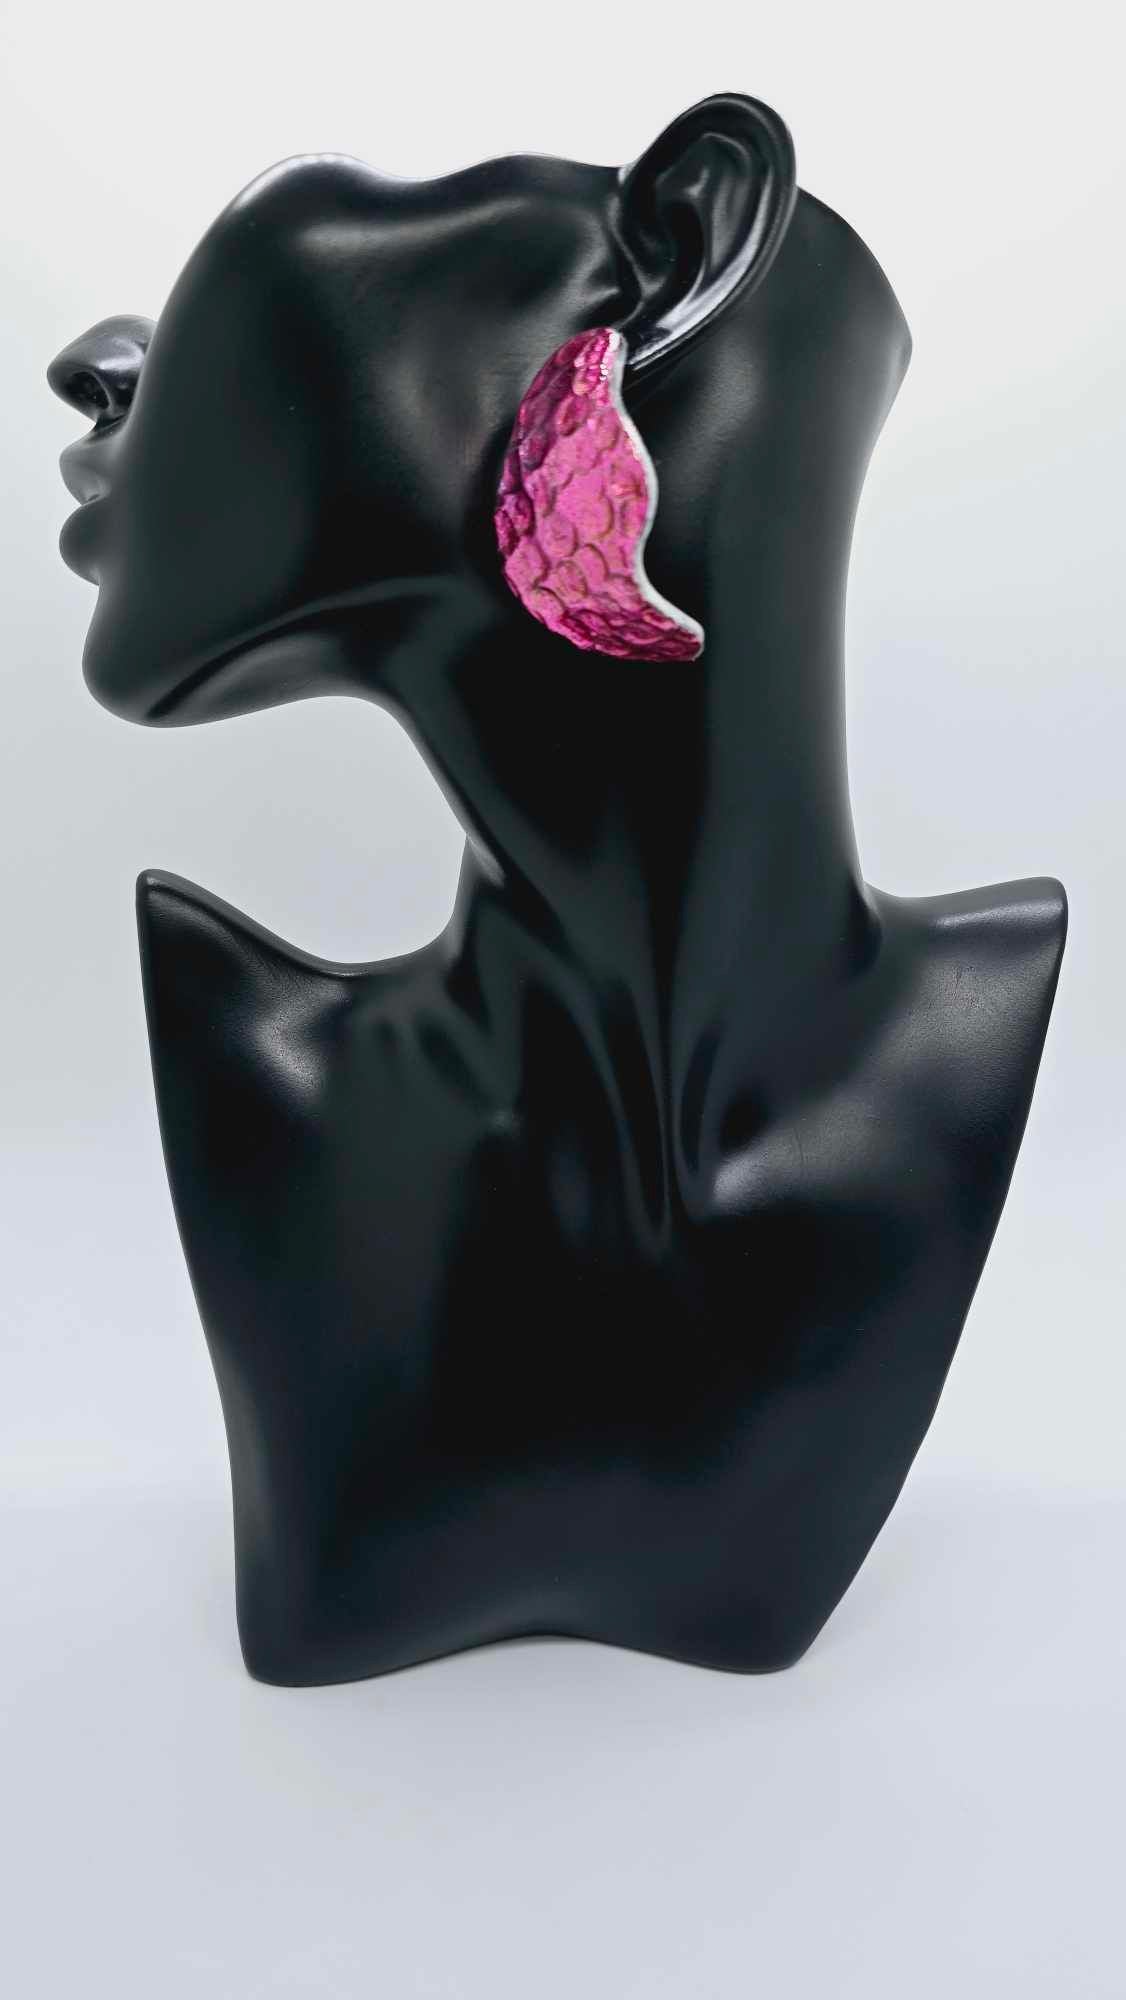 BILLY Hot Pink clay earrings! (1294 Mosaic)